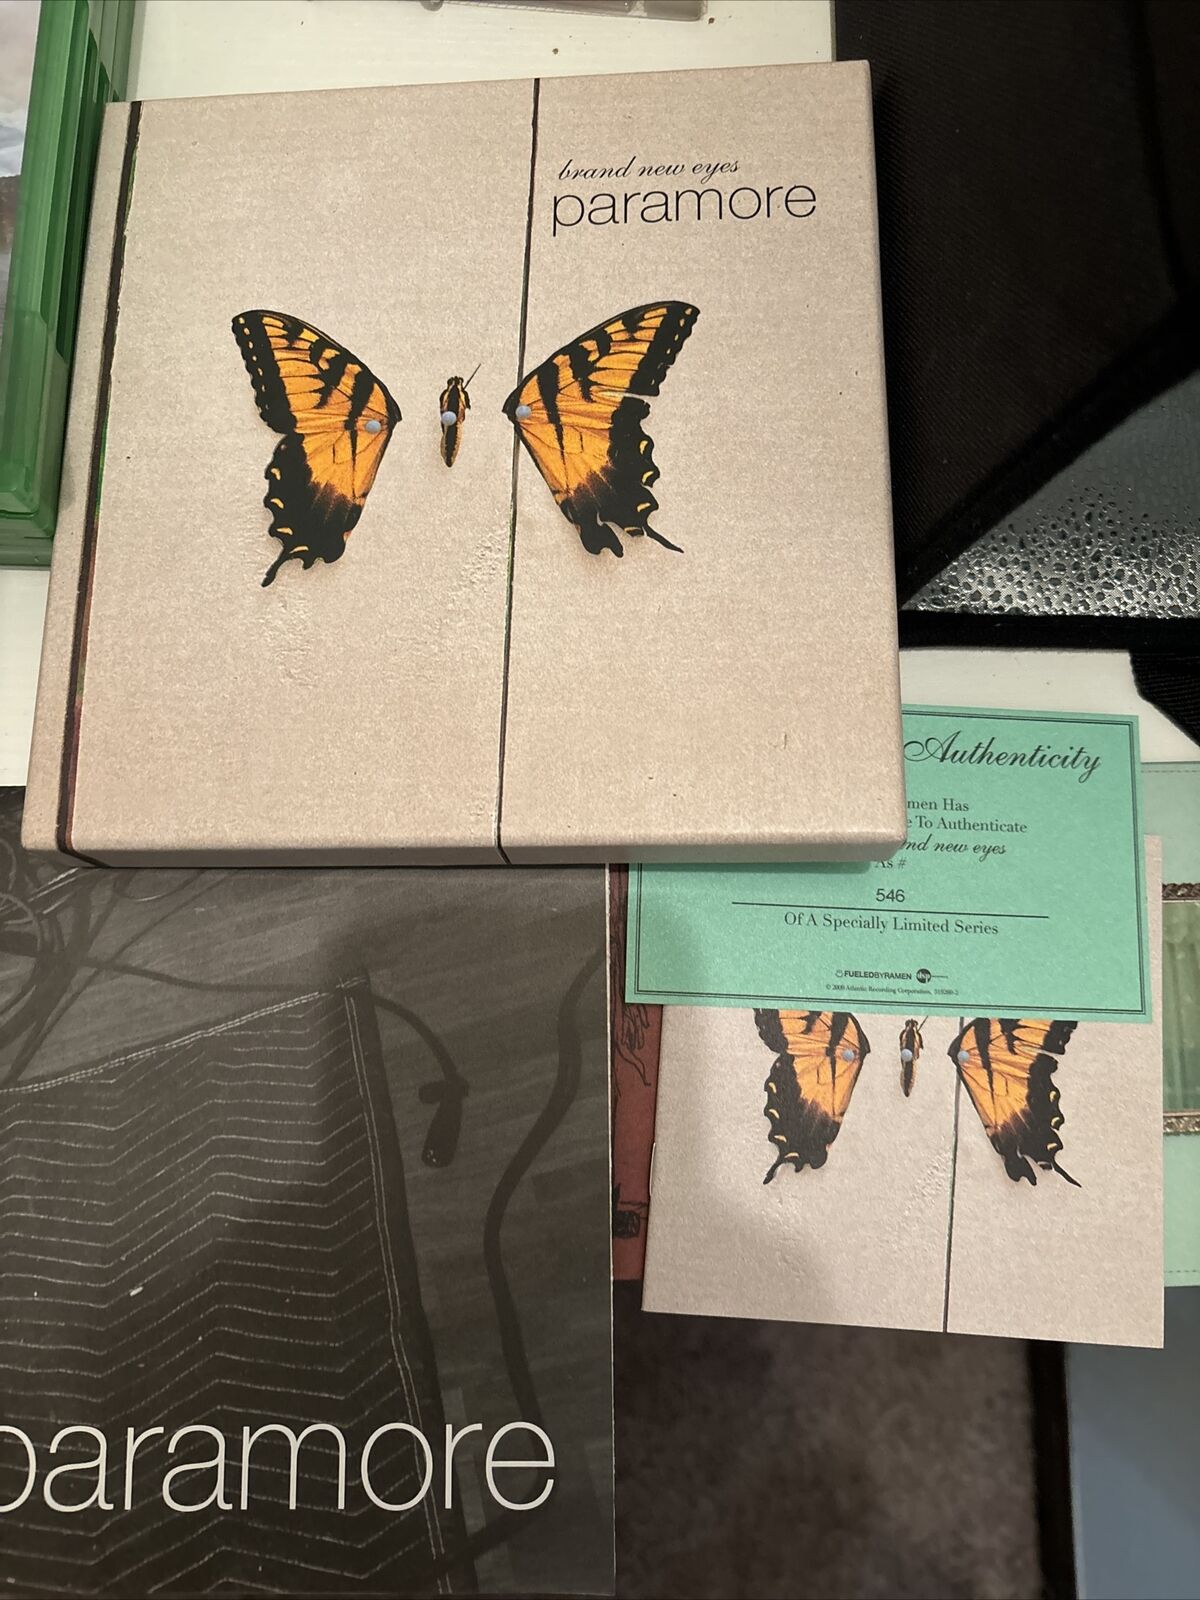 Paramore BRAND NEW EYES Box Set - COMPLETE